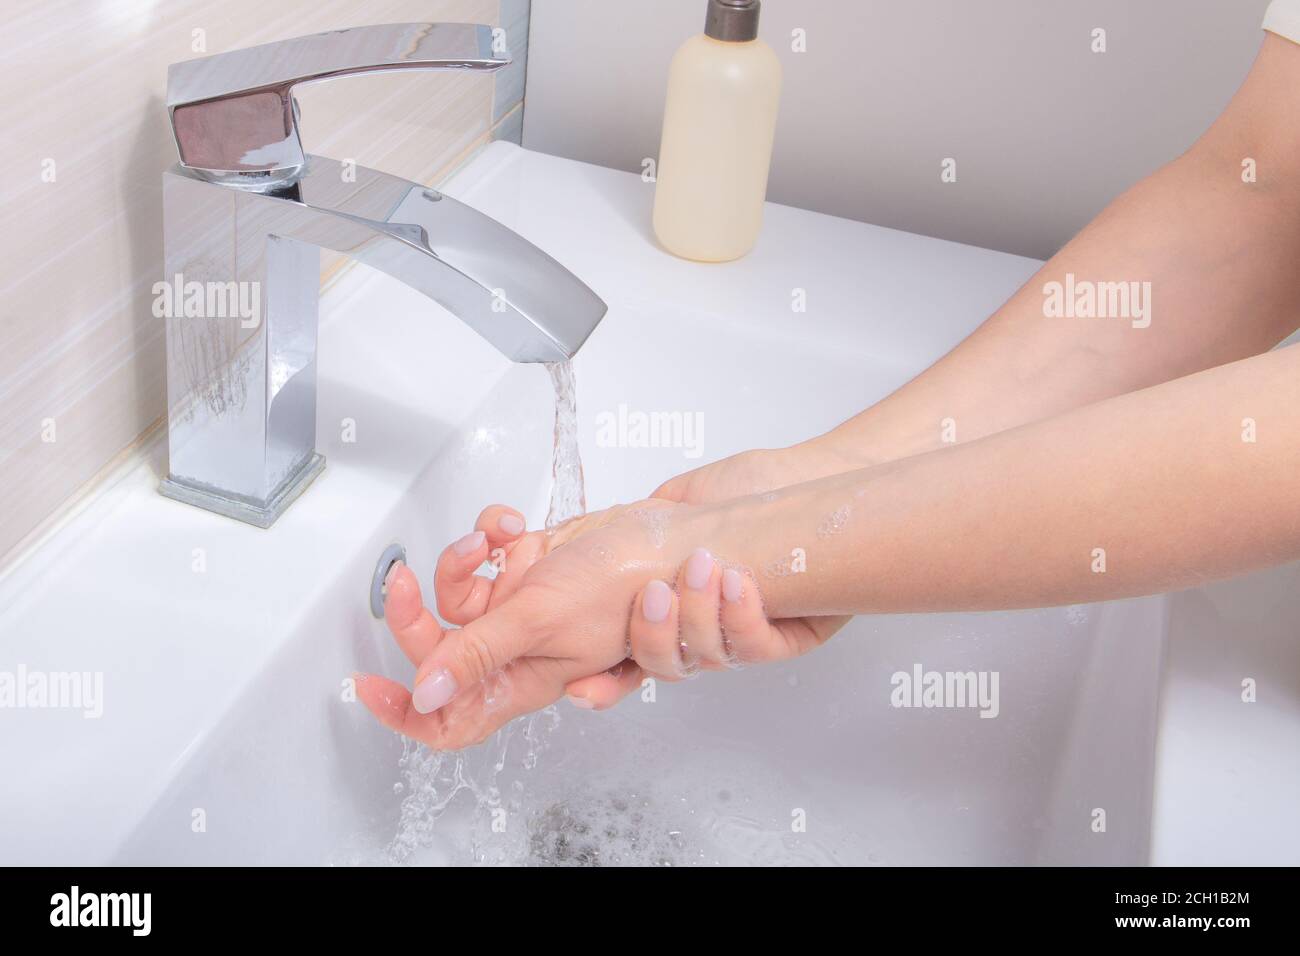 Woman washing with Soap hands thoroughly to Corona virus prevention. Hygiene concept. Washing frequently or using hand sanitizer gel Stock Photo